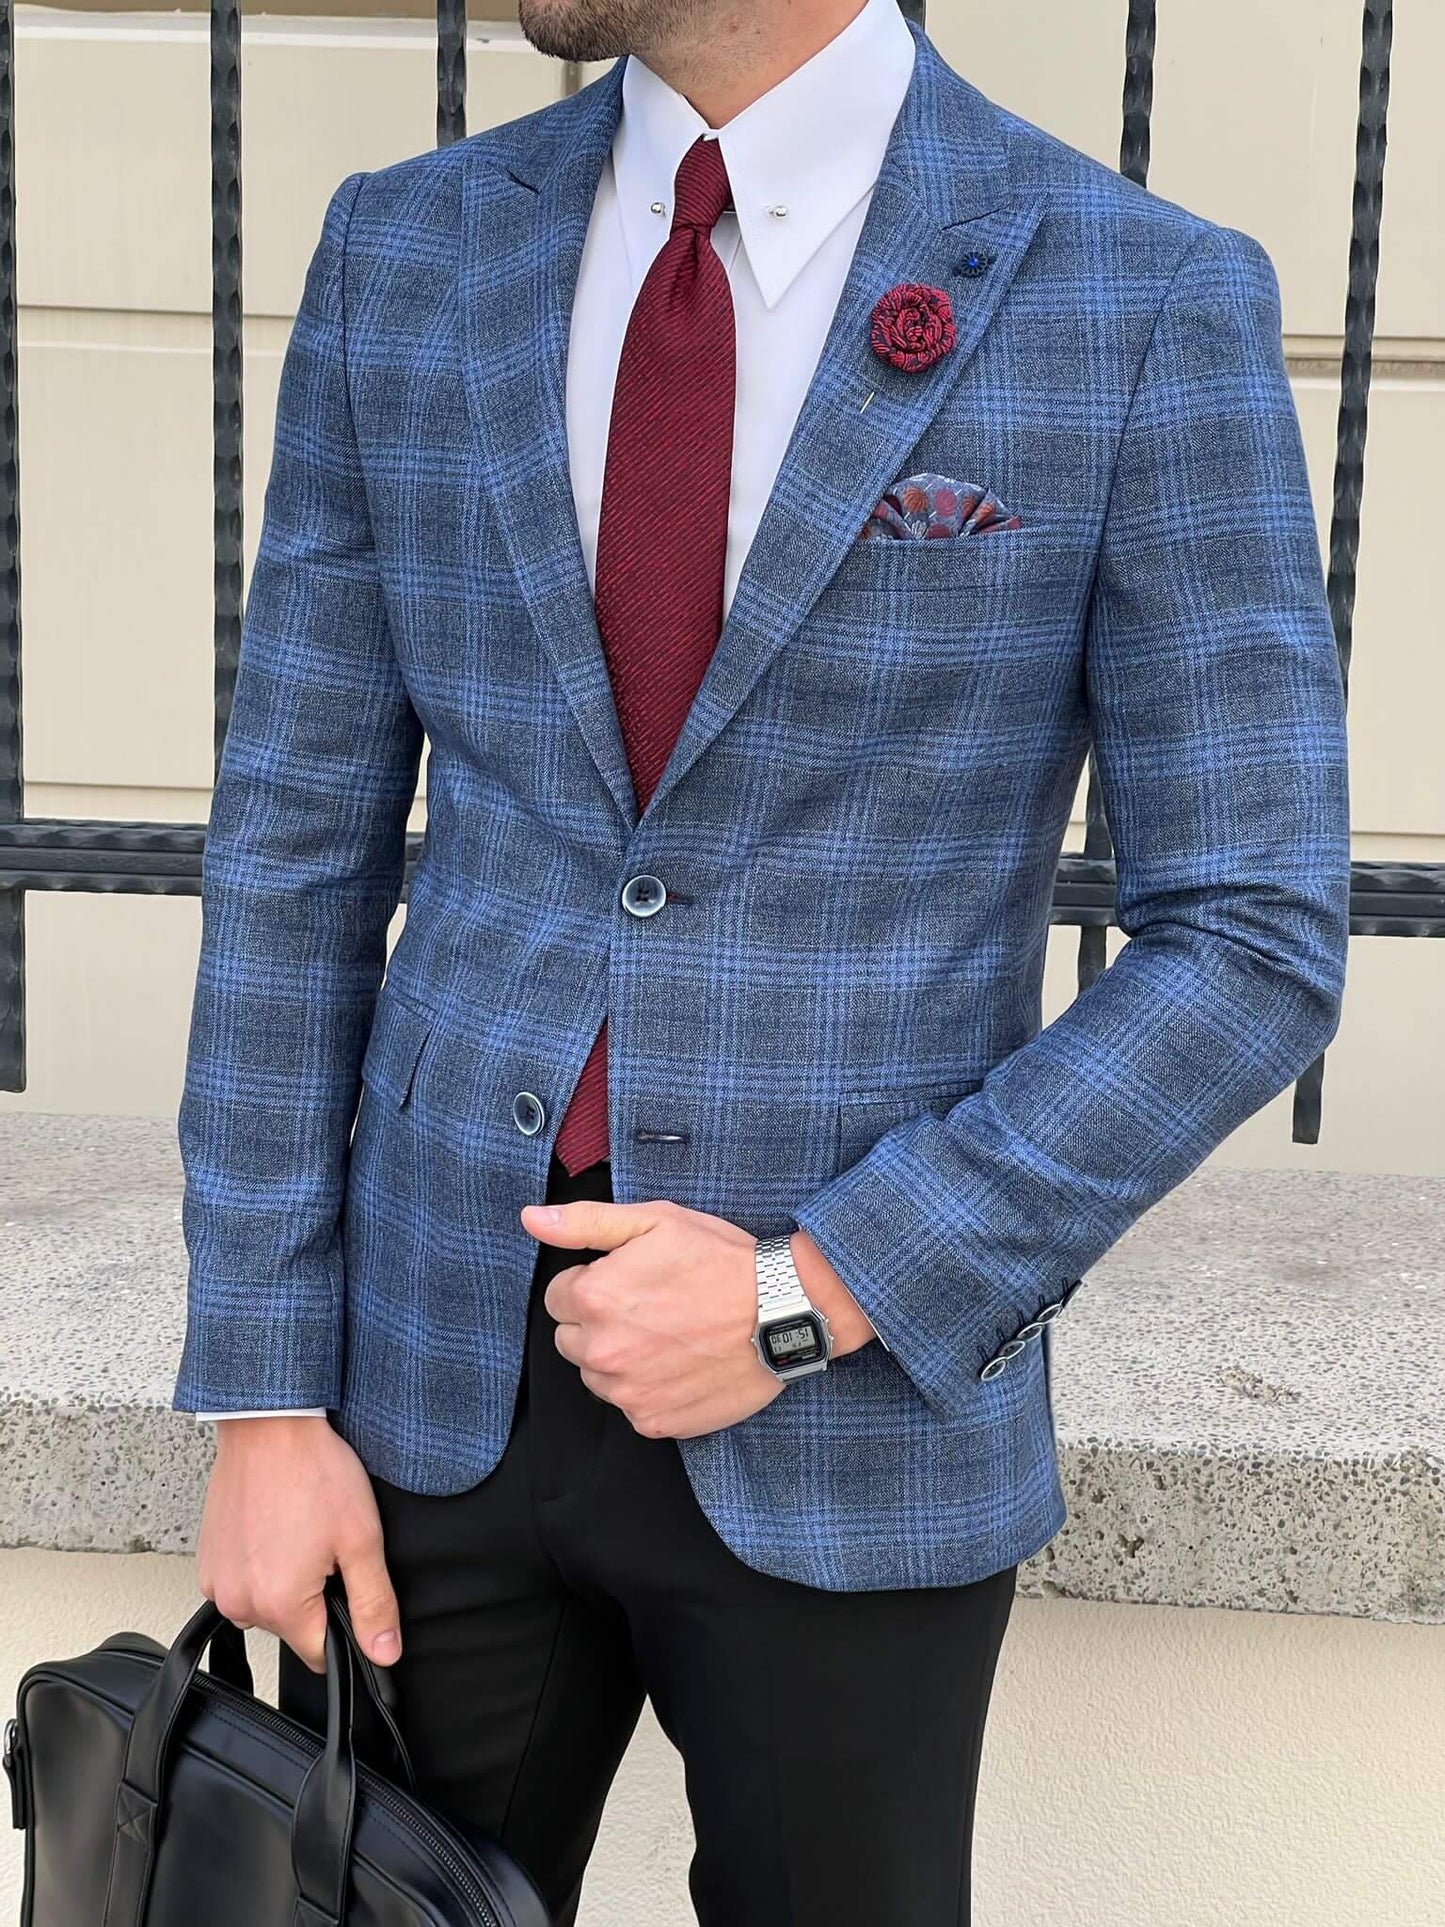 A navy blue jacket with unique patterns